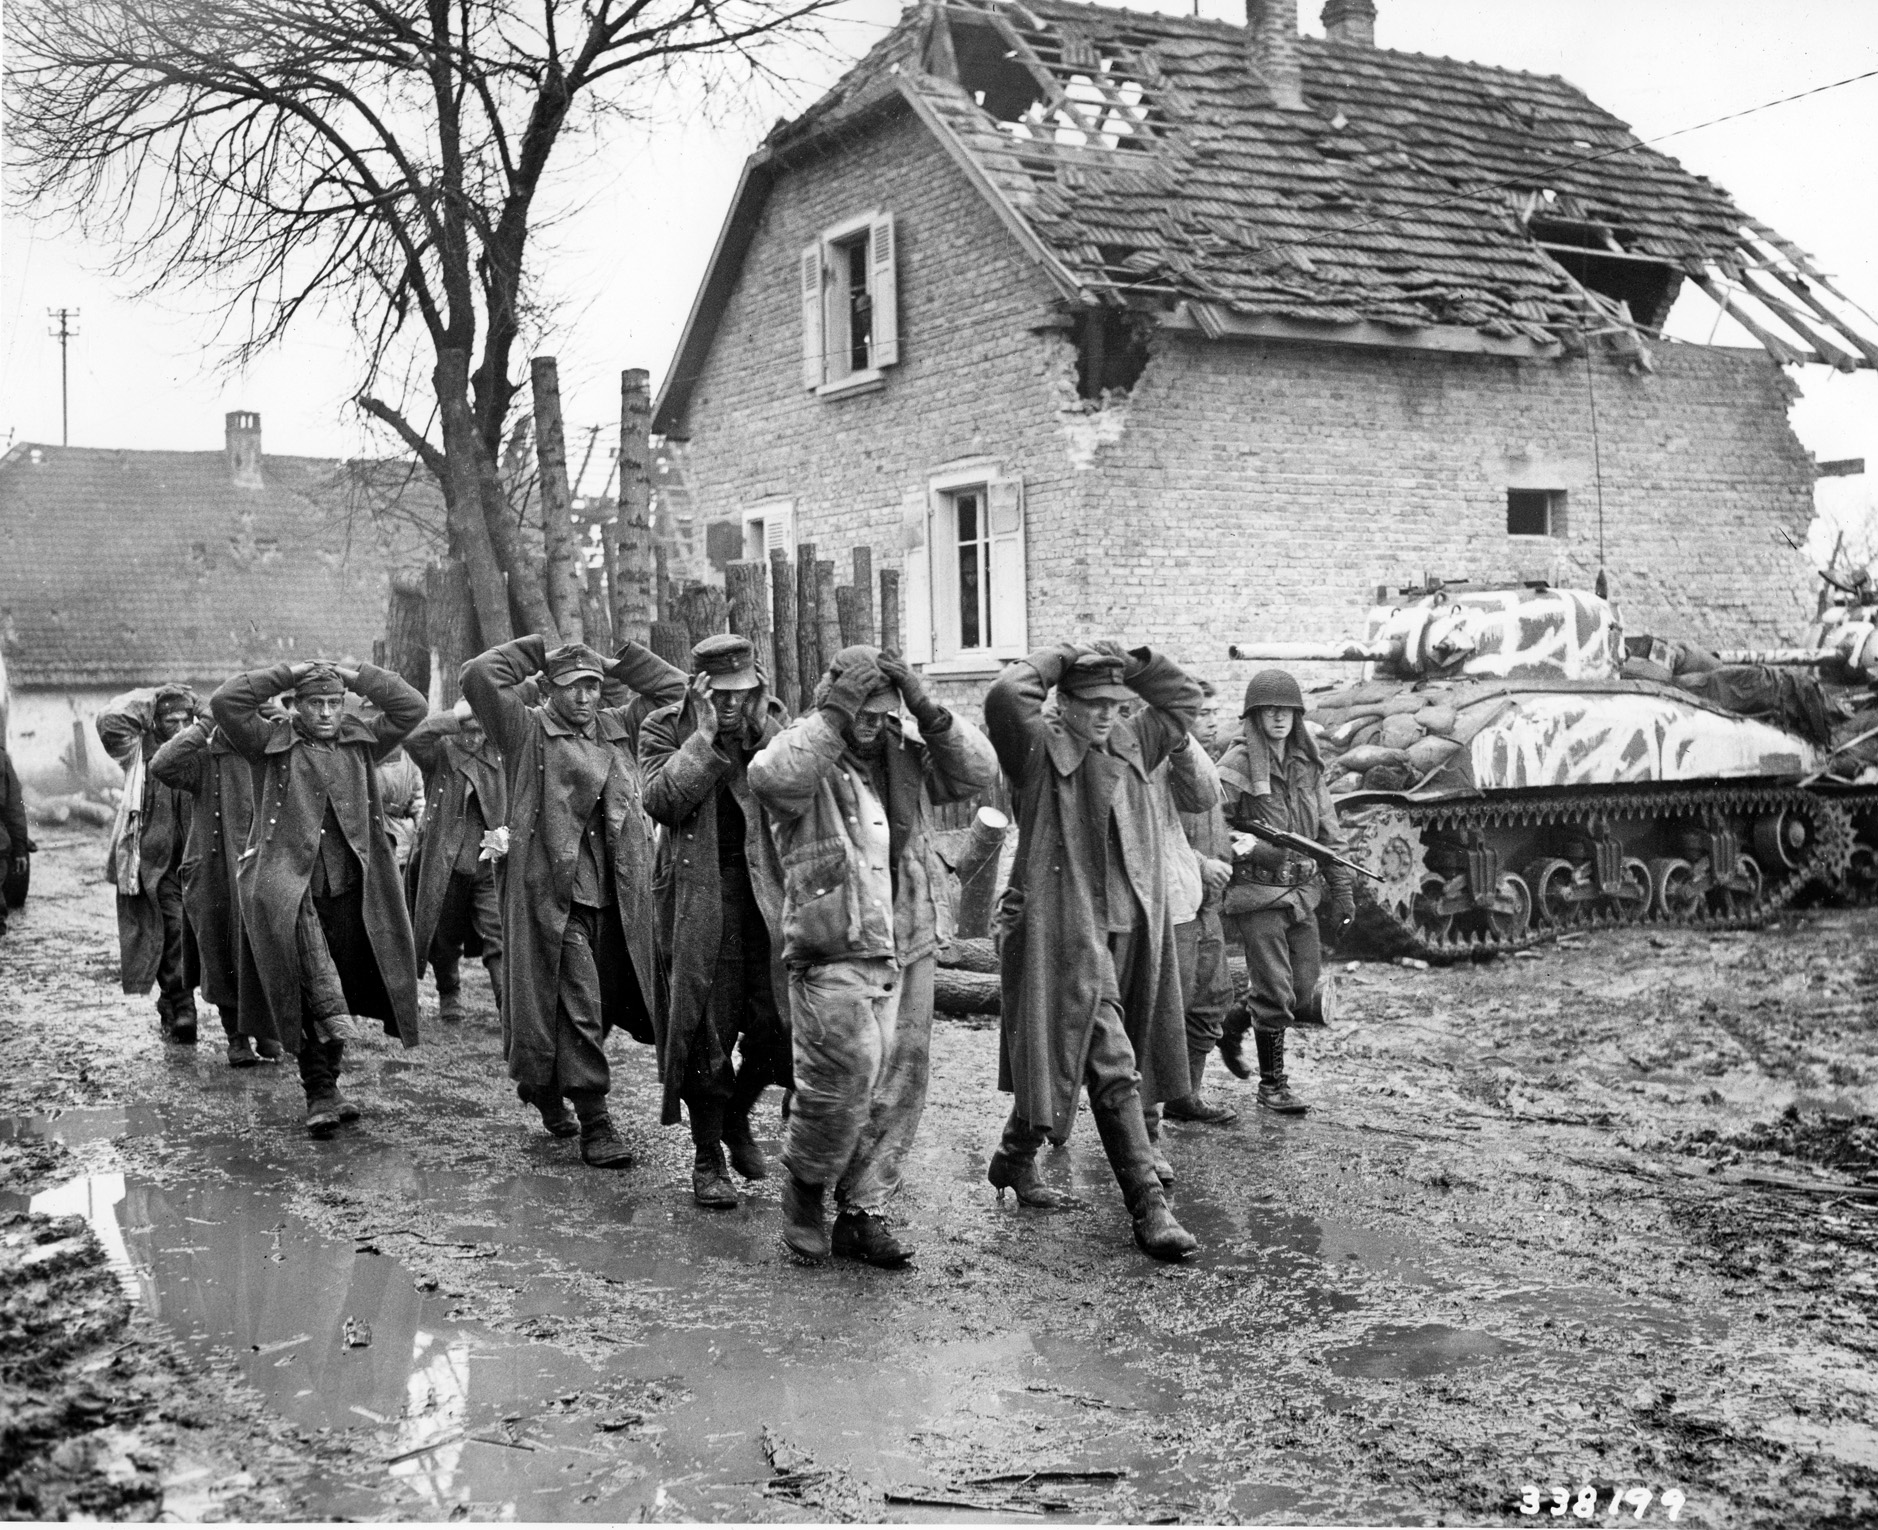 Bush returned to his unit in time to participate in the Battle for the Colmar Pocket, where he found that Germans in the regular army easily surrendered, but the SS soldiers rarely surrendered. Here, soldiers with the 75th Infantry Division escort surrendering Germans to the rear on February 1, 1945.